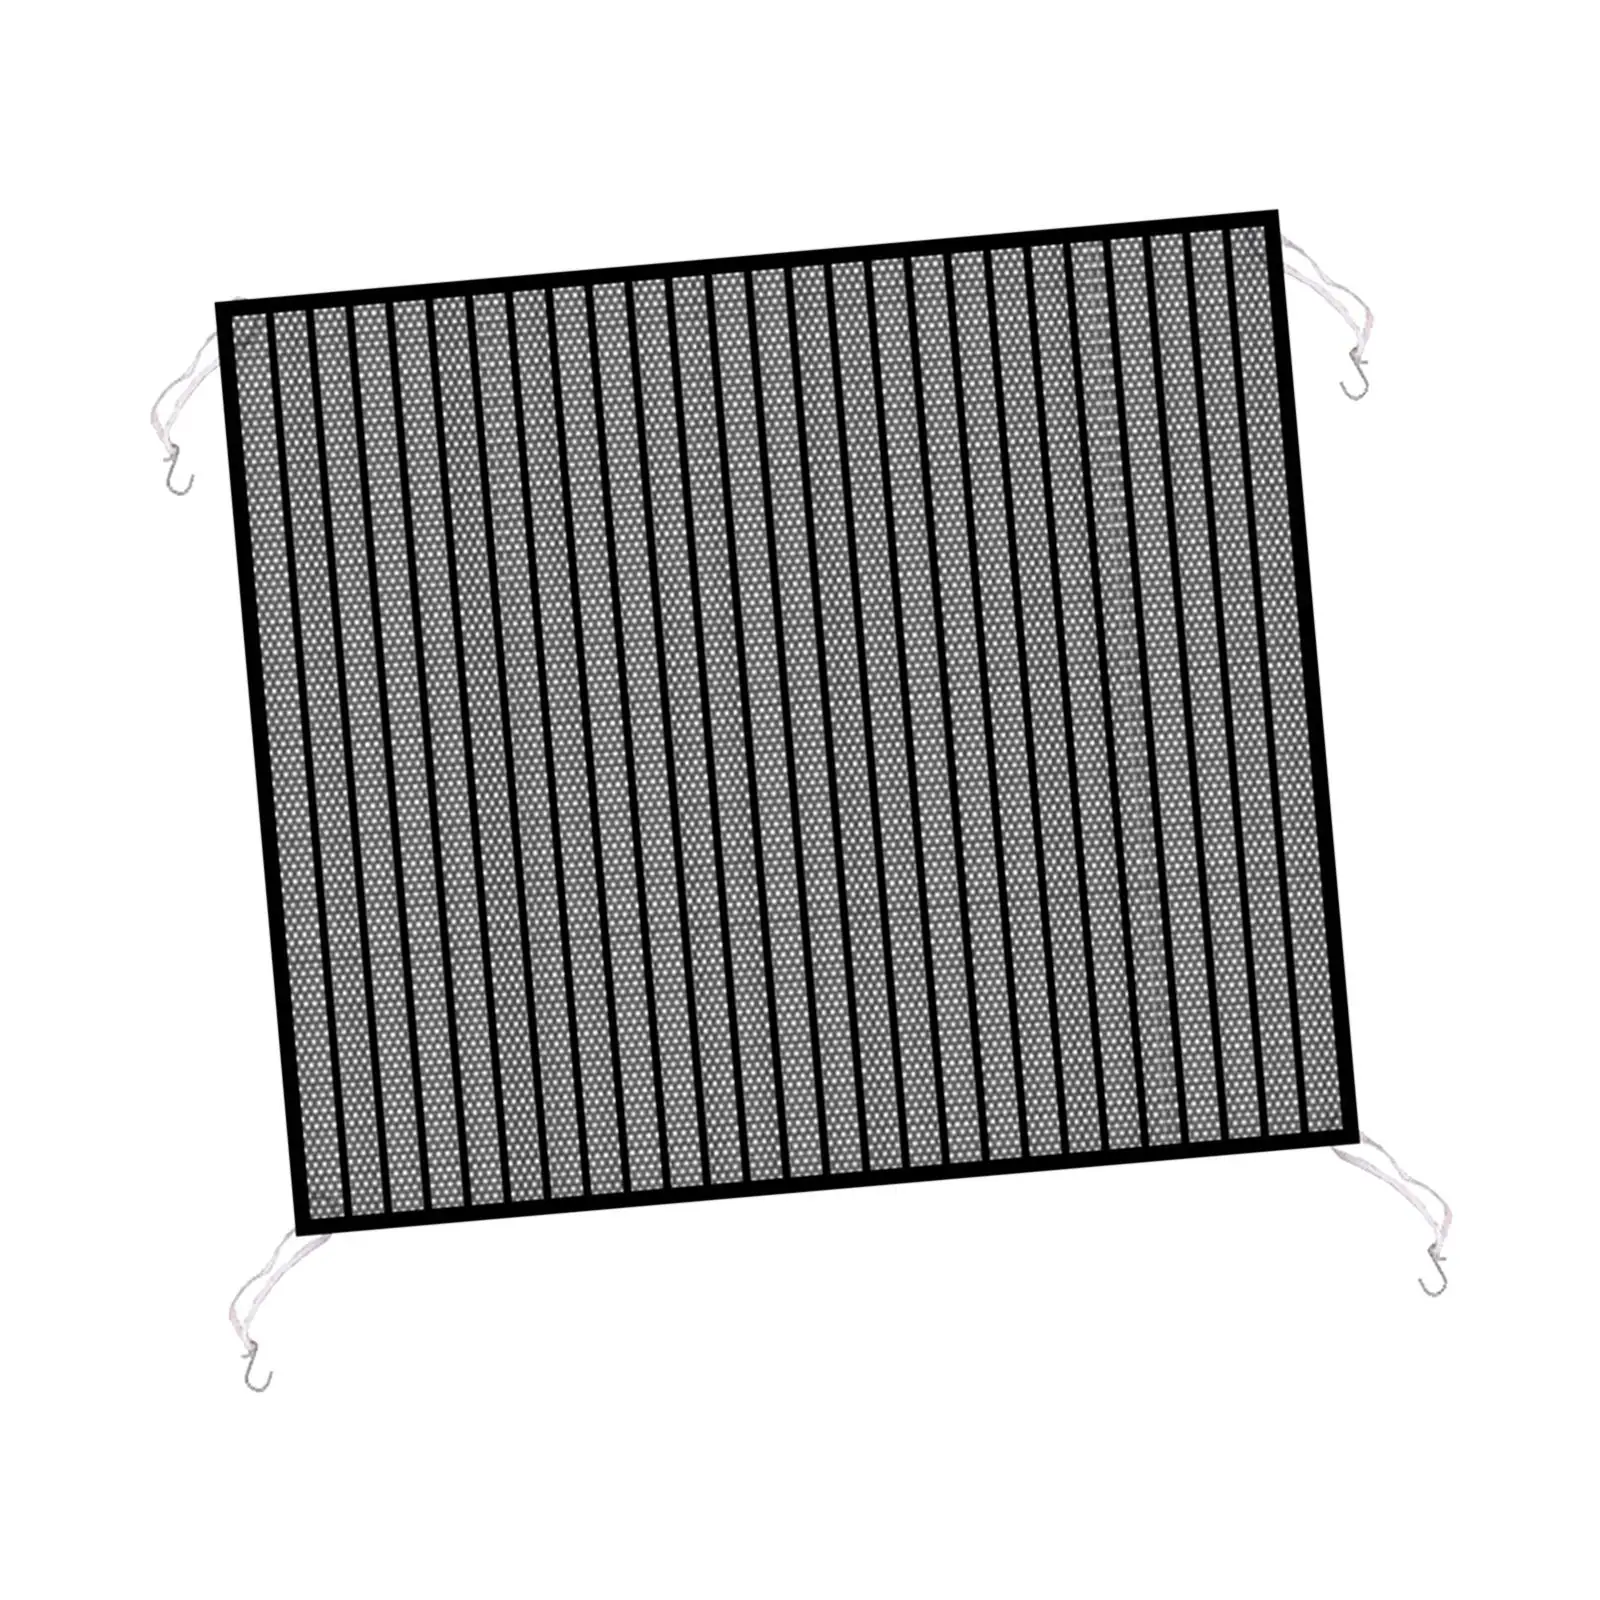 Car Radiator Air Conditioner Water Tank Protection Mesh Cover Net with 4 Install